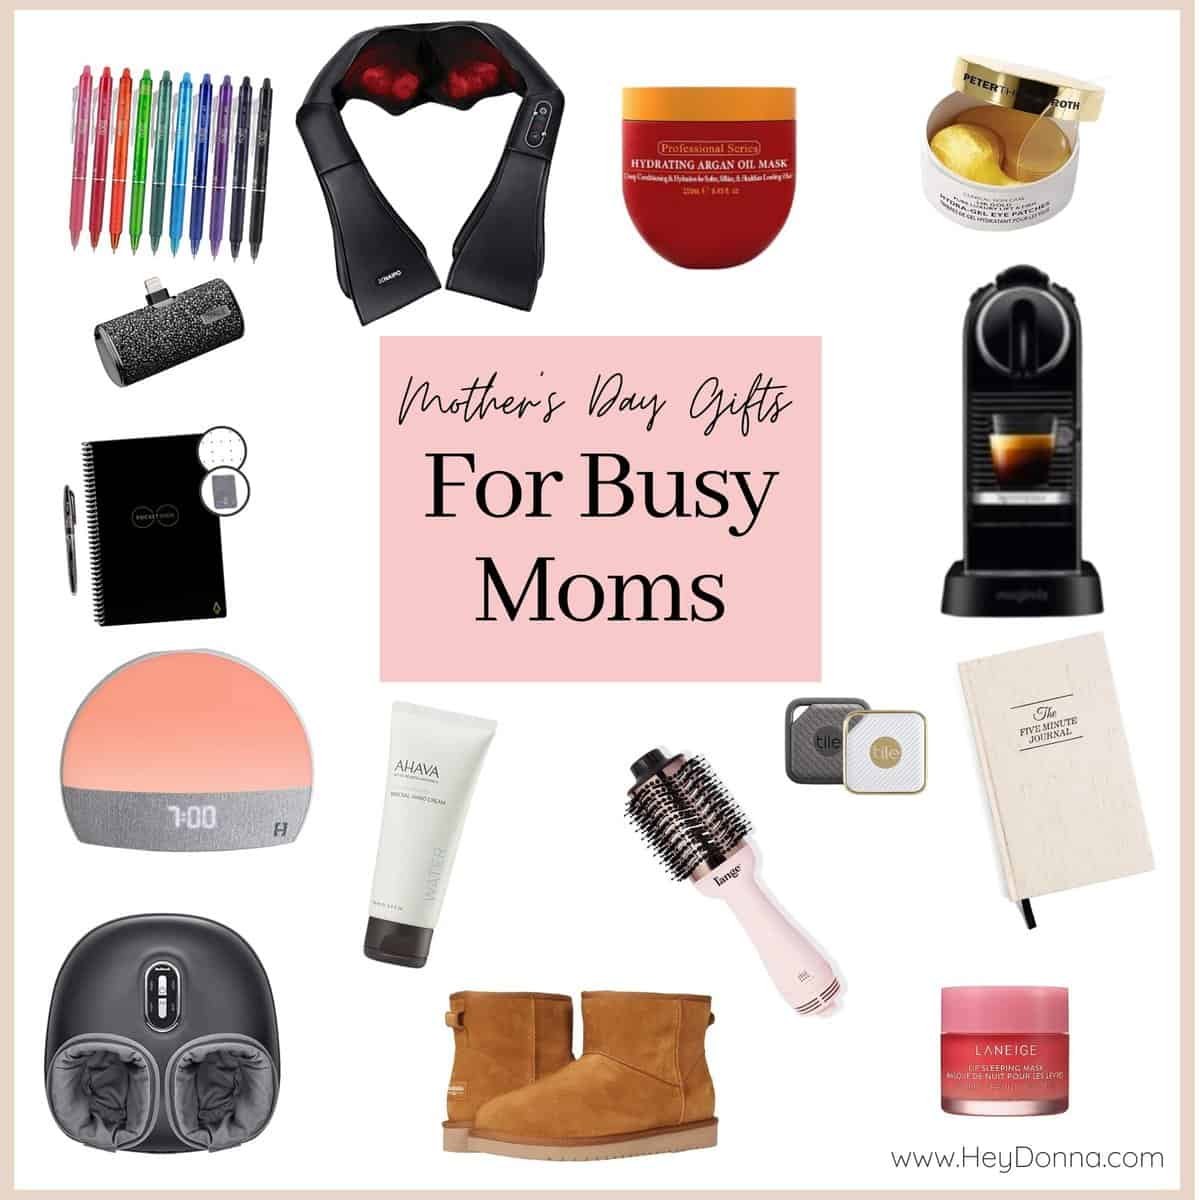 Mothers Day Gifts for Busy Moms